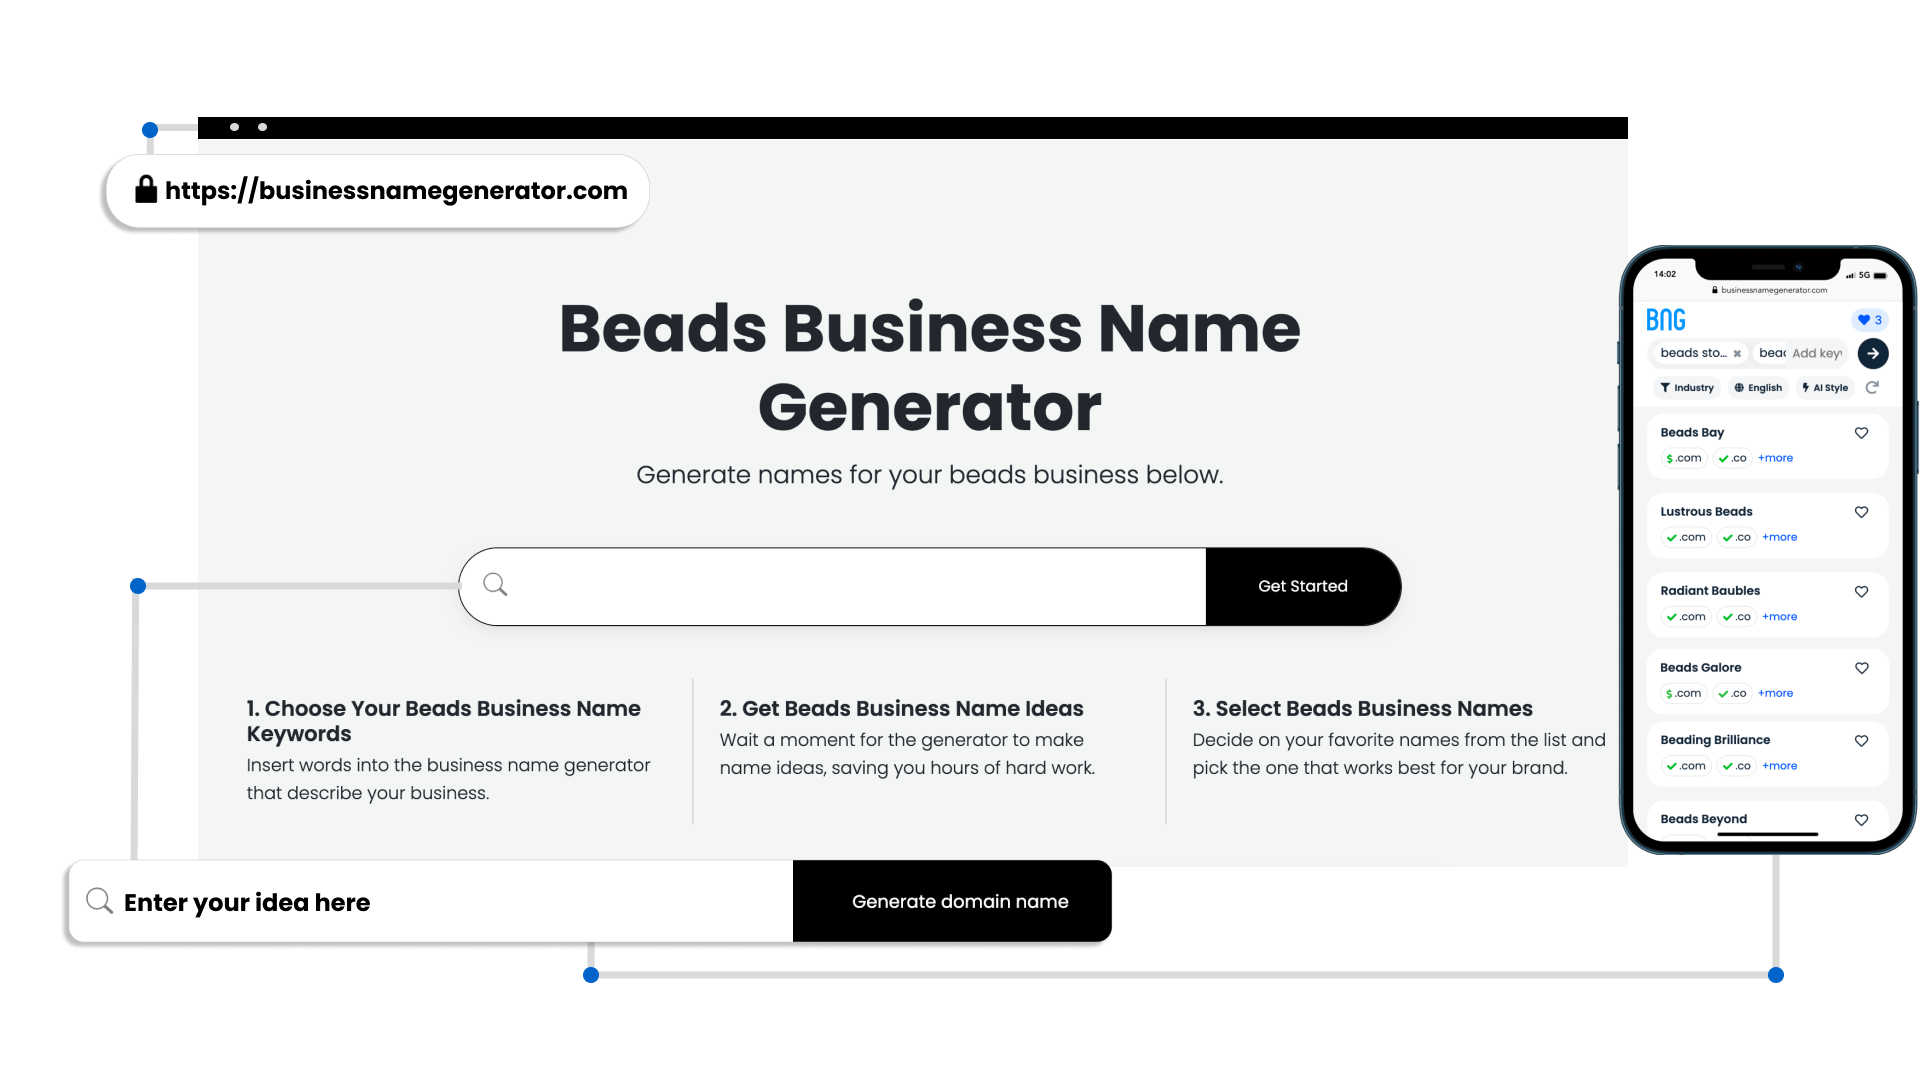 Beads Business Name Generator Functionality